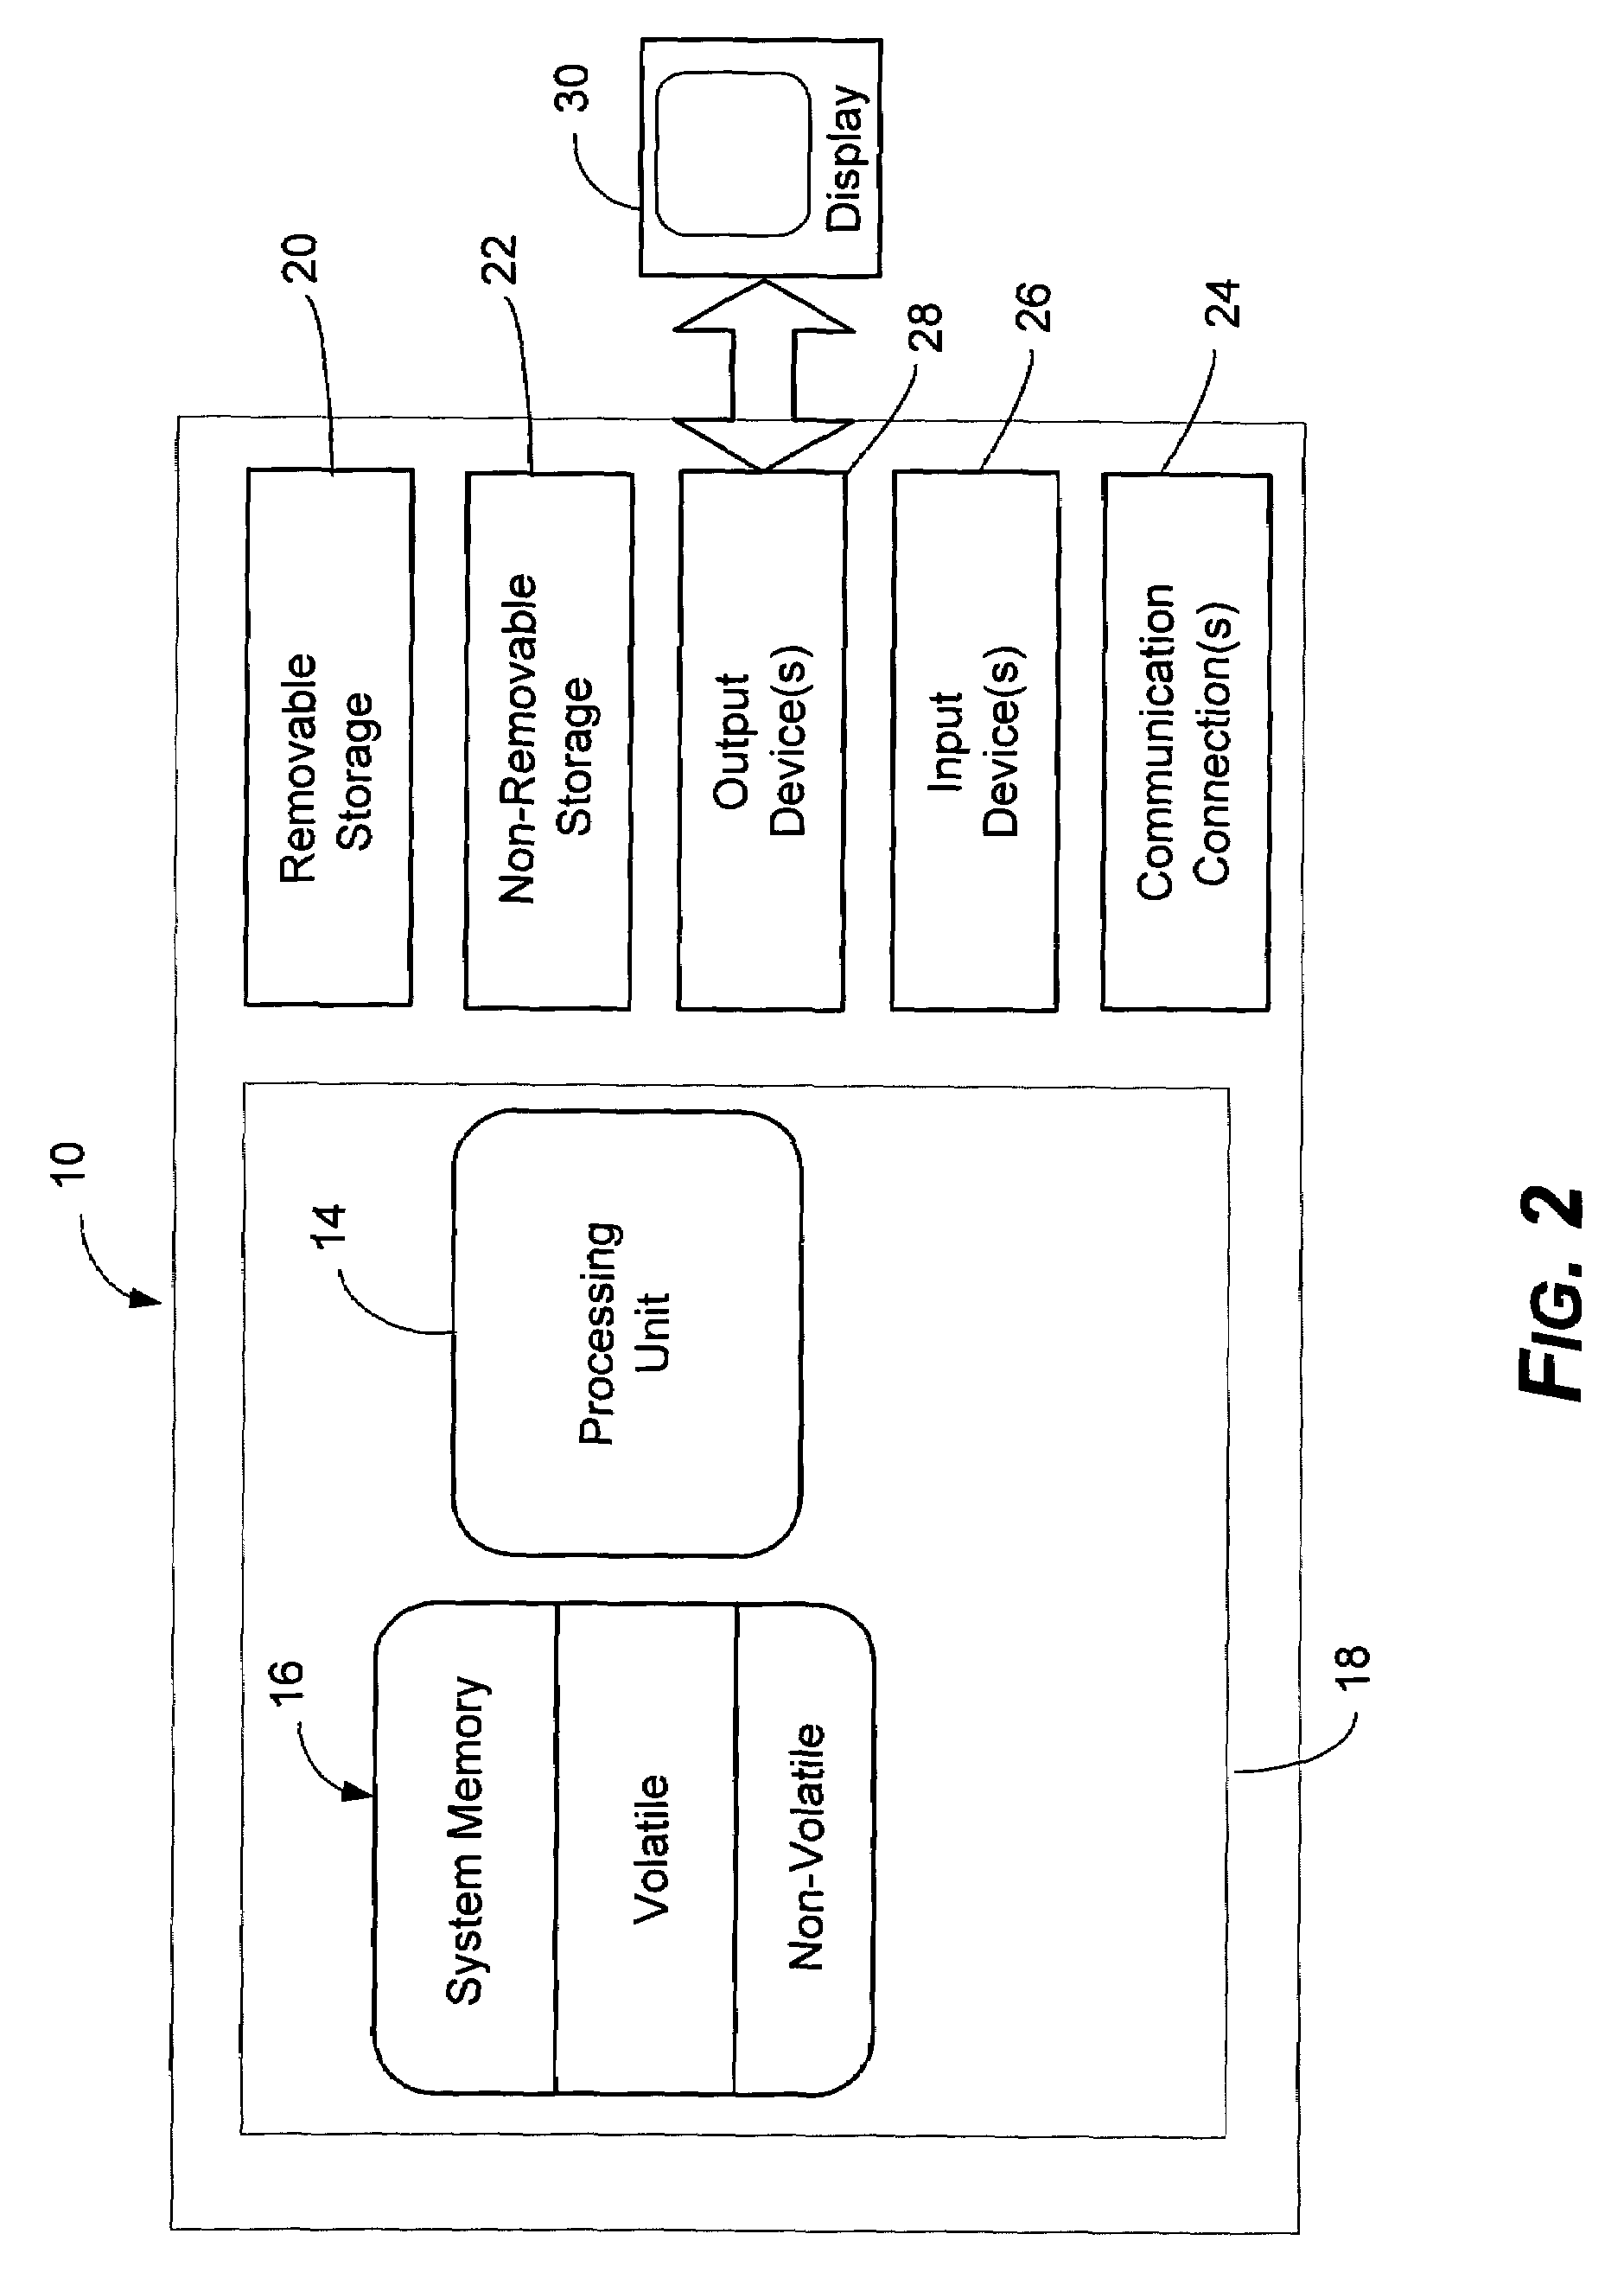 Wireless device discovery and configuration